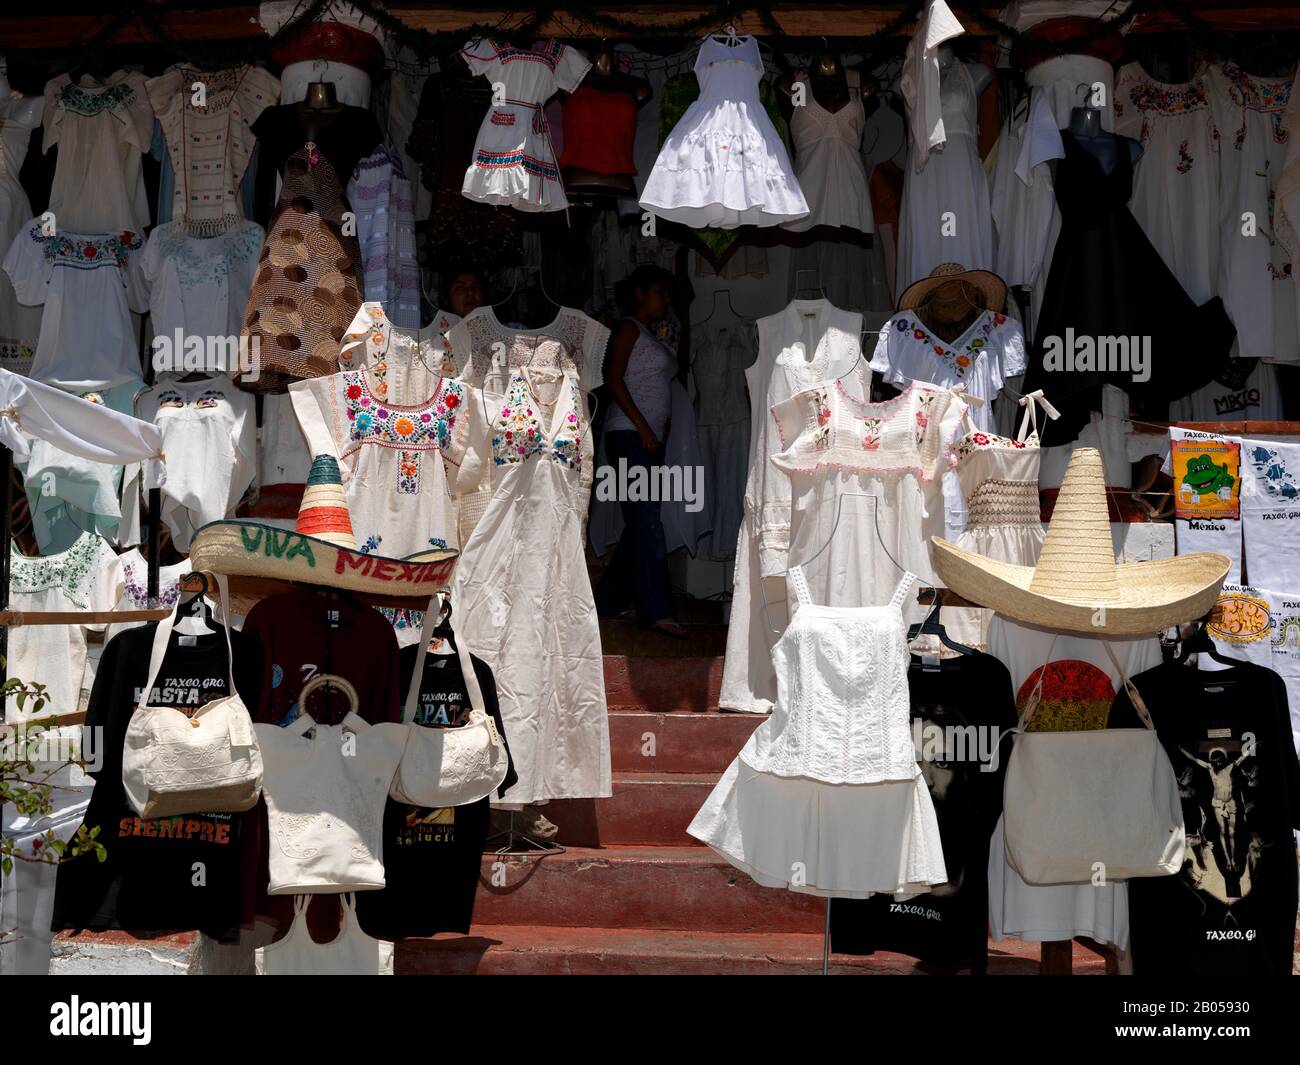 Dresses for sale in a street market, Taxco, Guerrero, Mexico Stock Photo